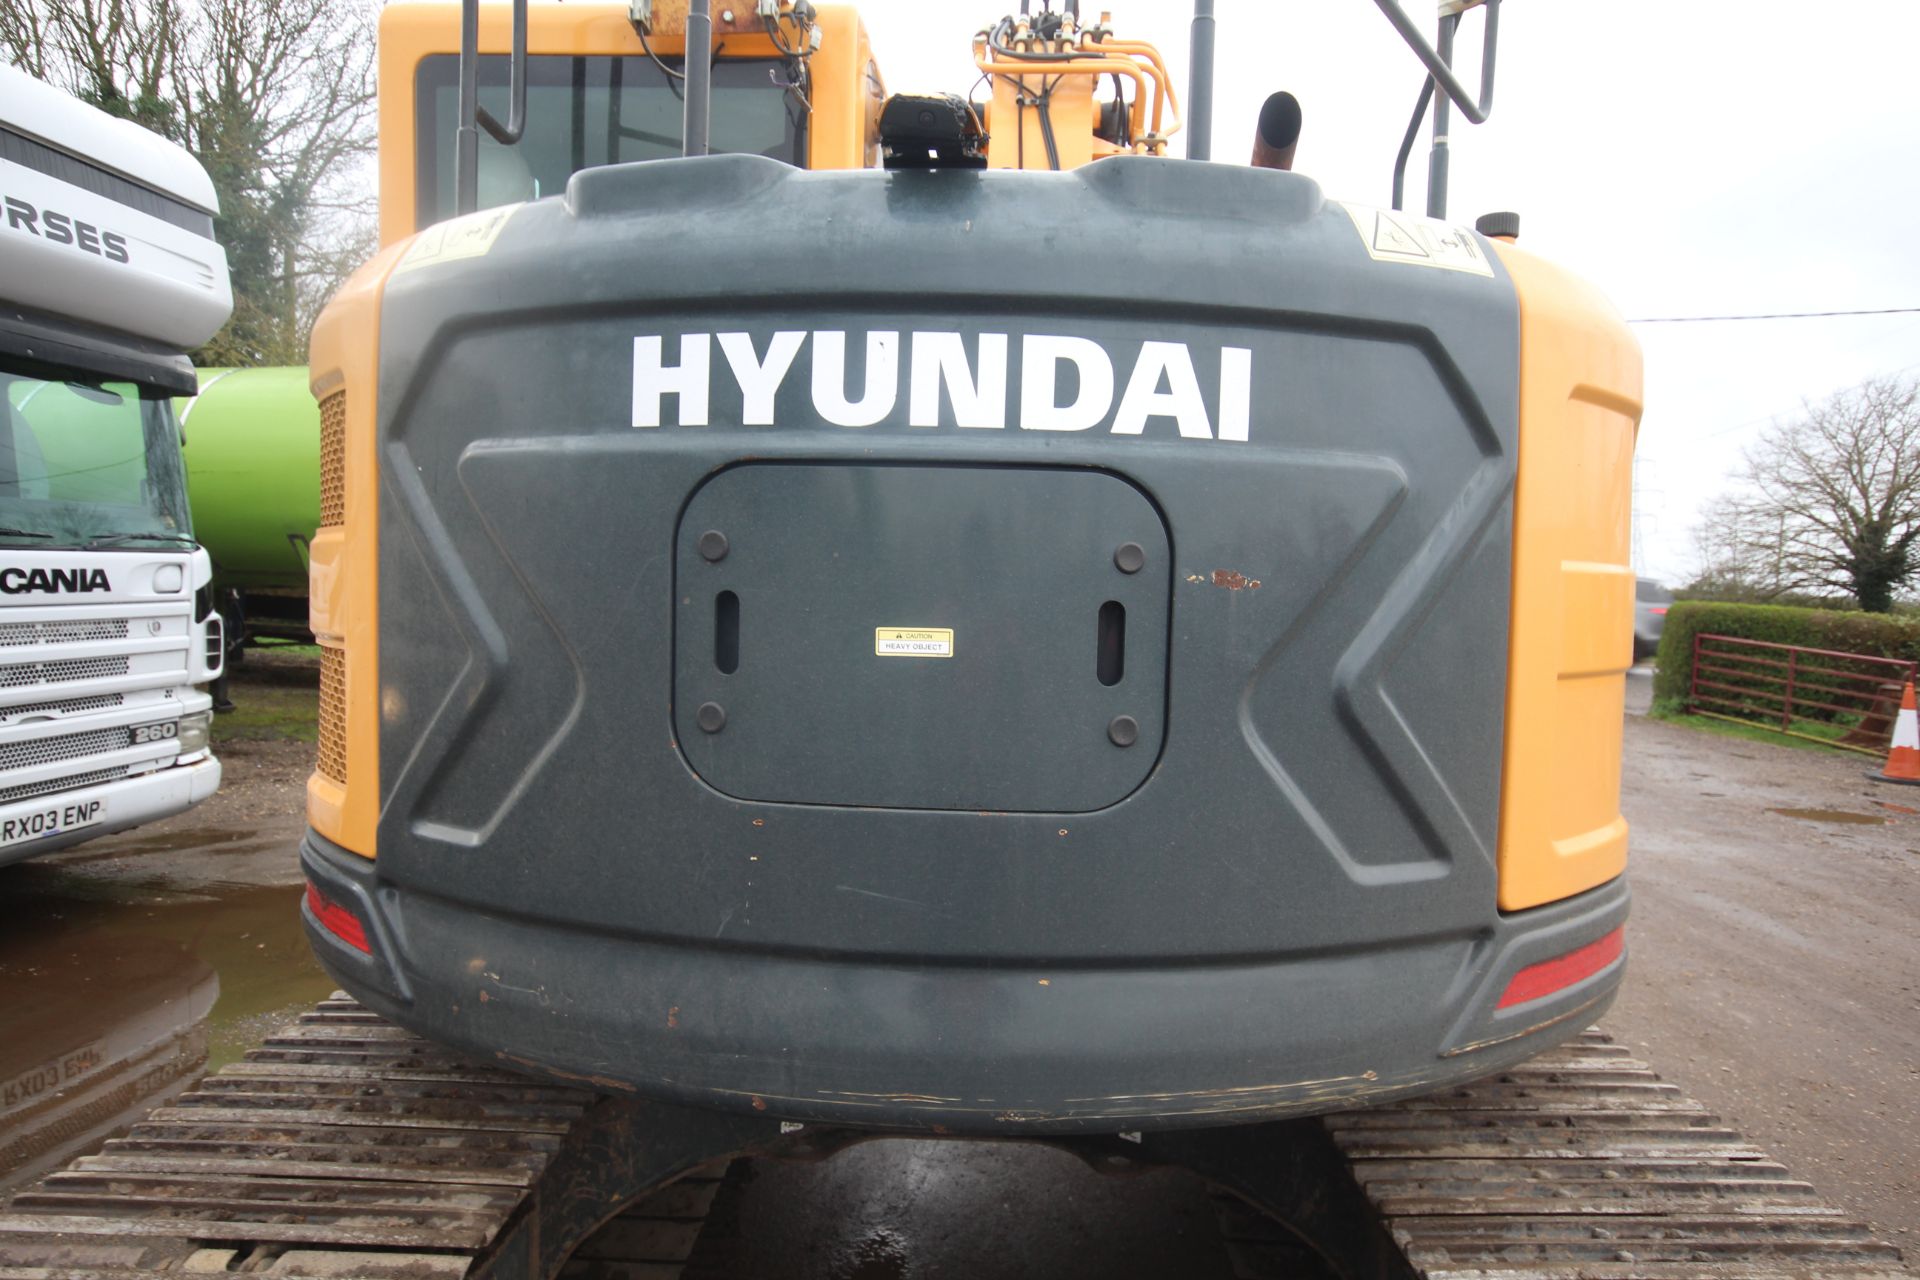 **CATALOGUE CHNAGE** Hyundai HX130 LCR 13T steel track excavator. 2018. c. 5,150 hours. Serial - Image 24 of 77